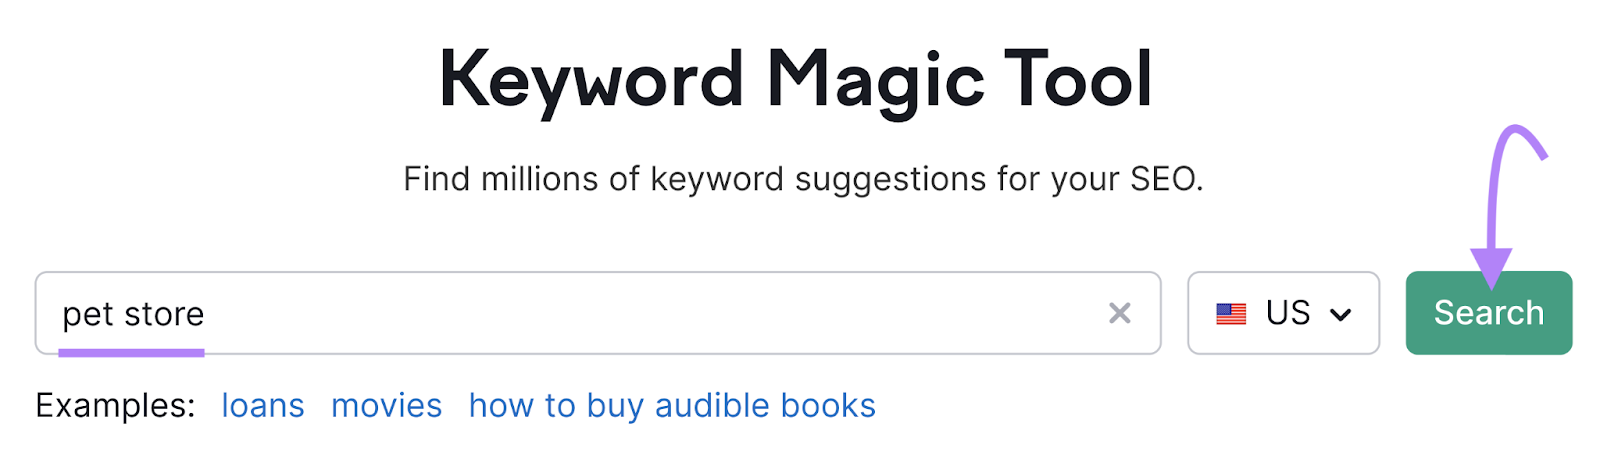 "pet store" entered into Keyword Magic tool search bar